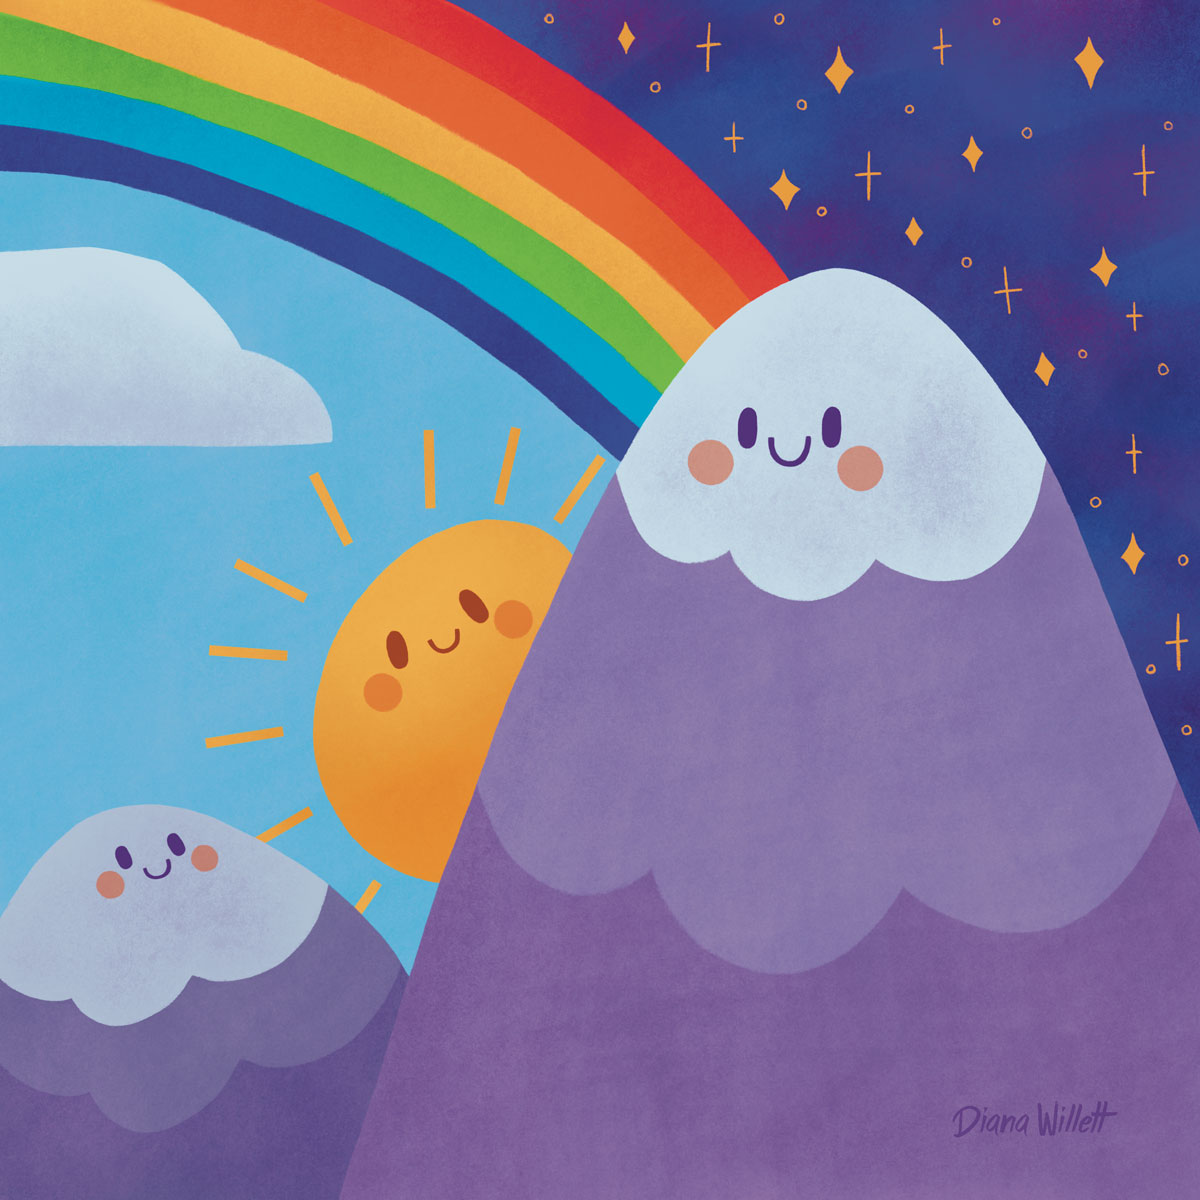 Kidlit Illustration by Diana Willett of two mountains smiling with a smiling sun peaking out and a rainbow.